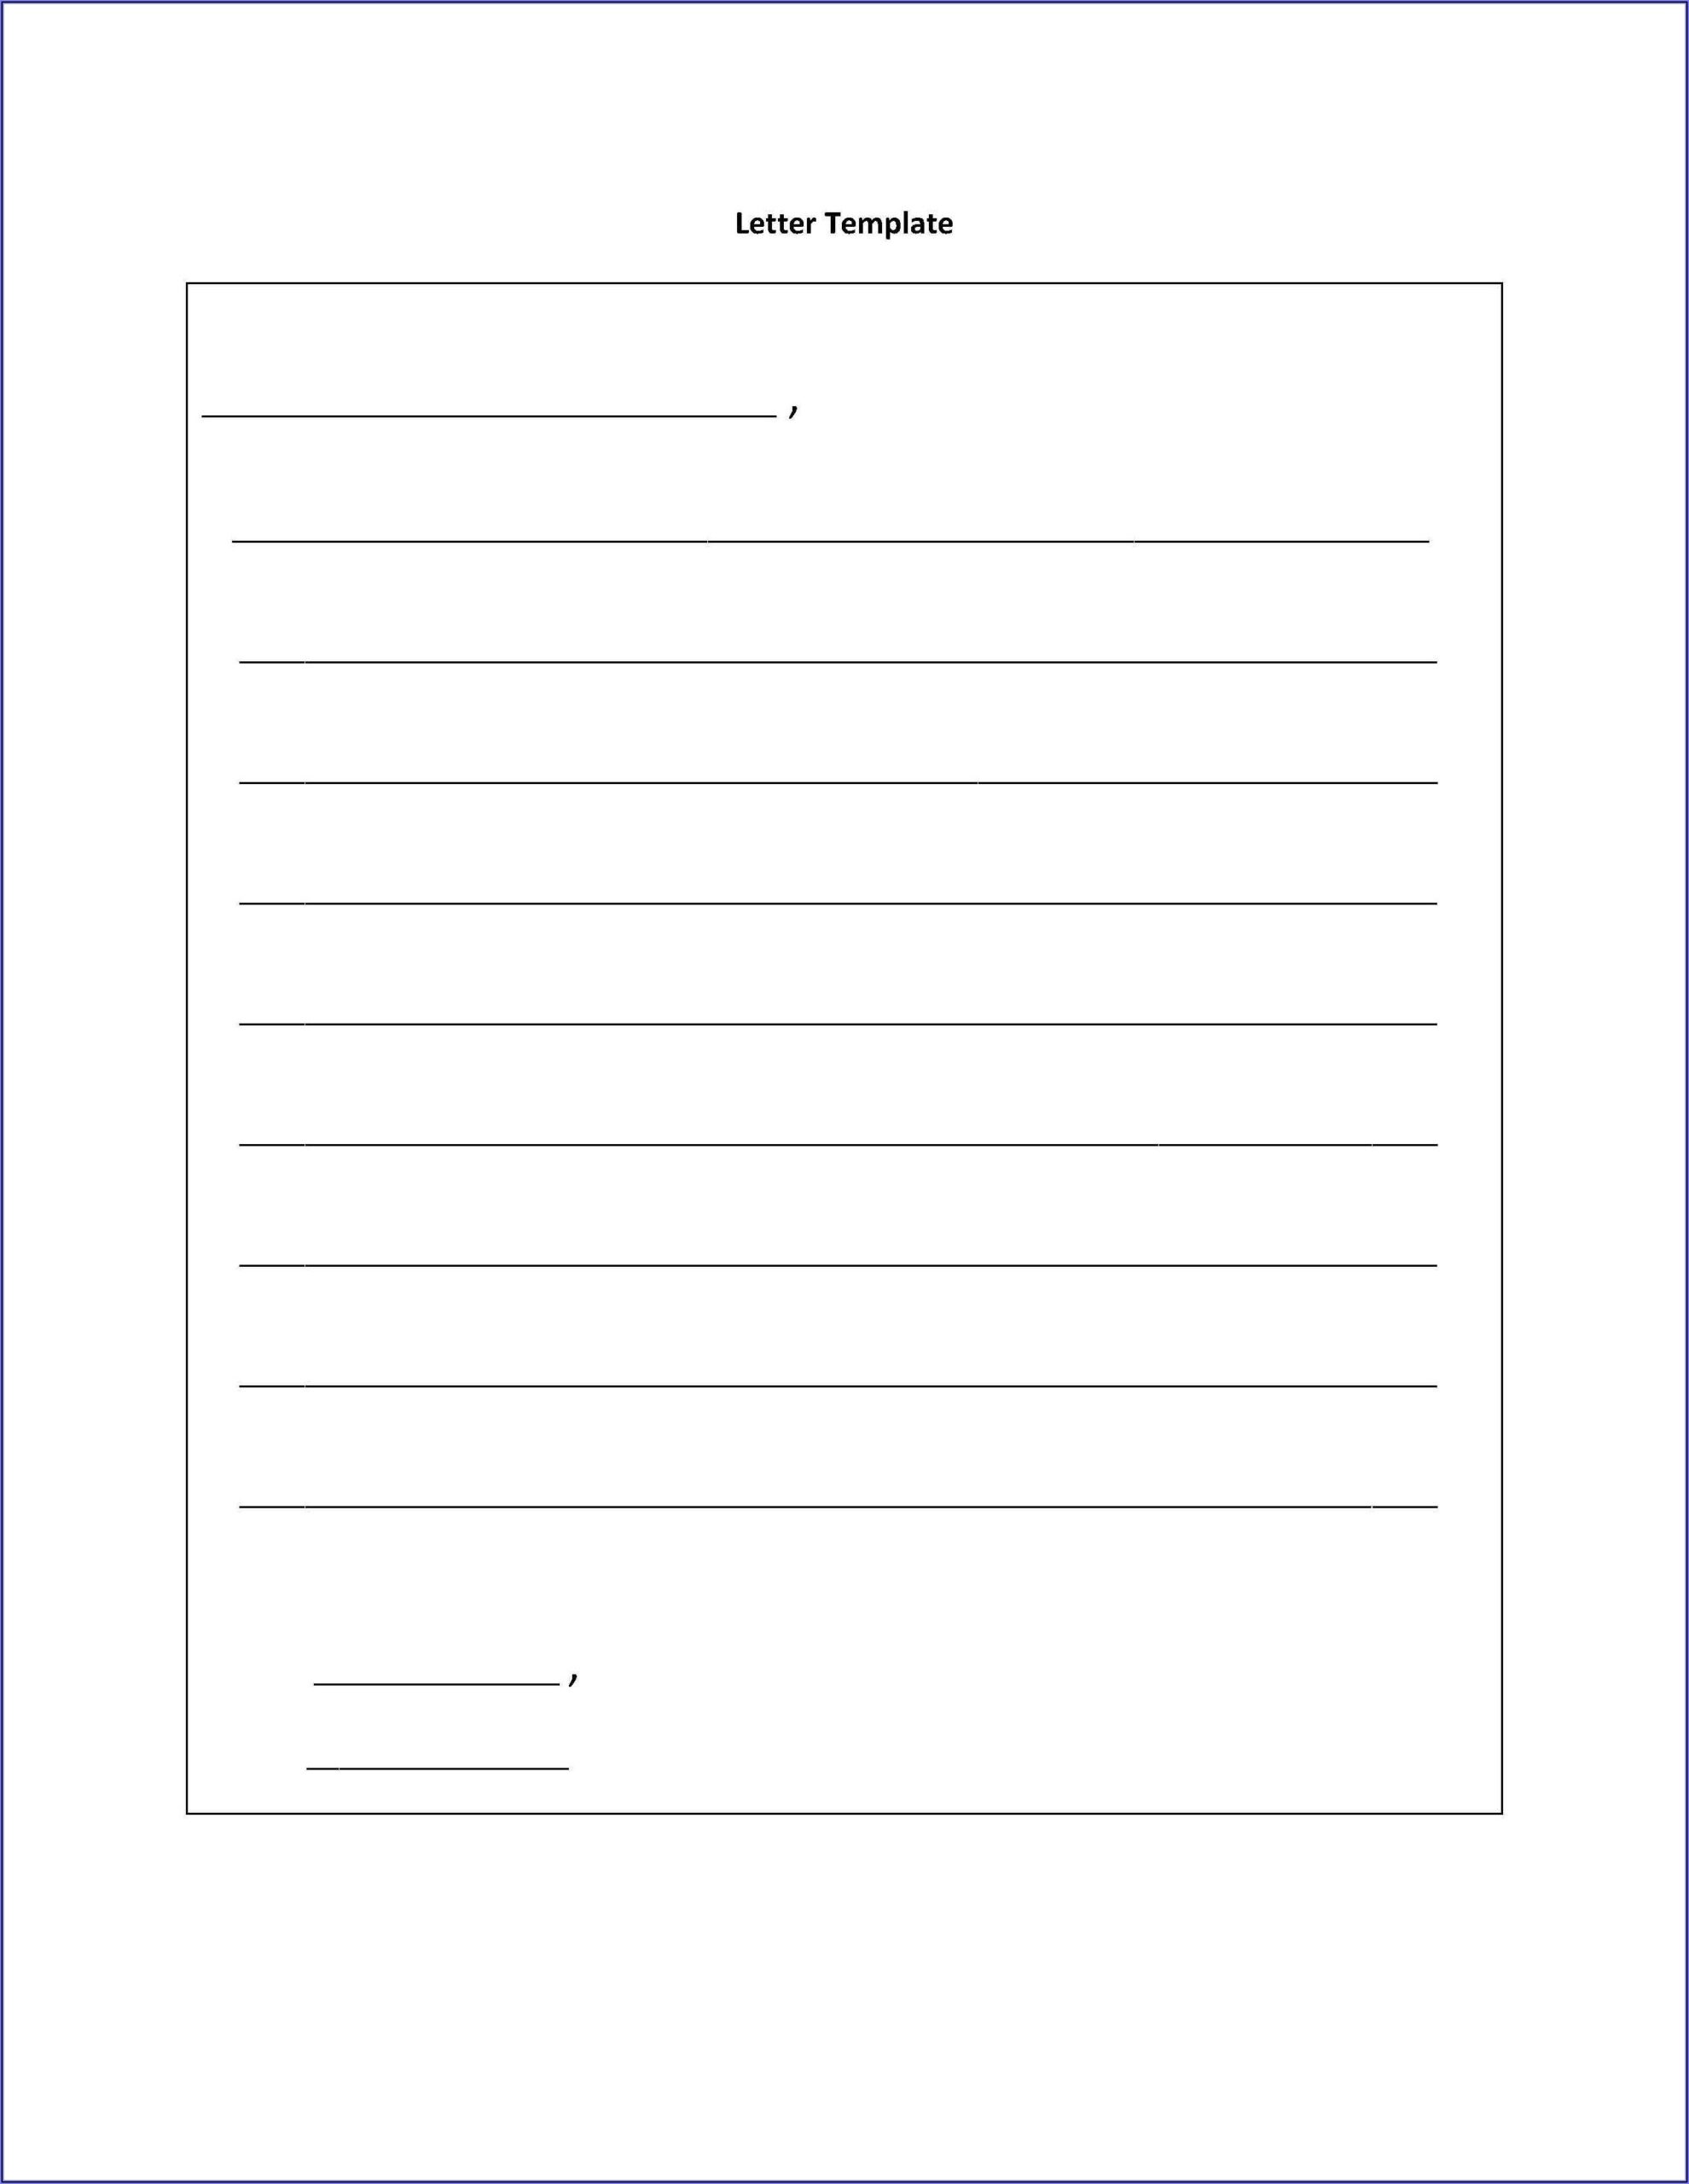 Blank Letter Writing Template For Students